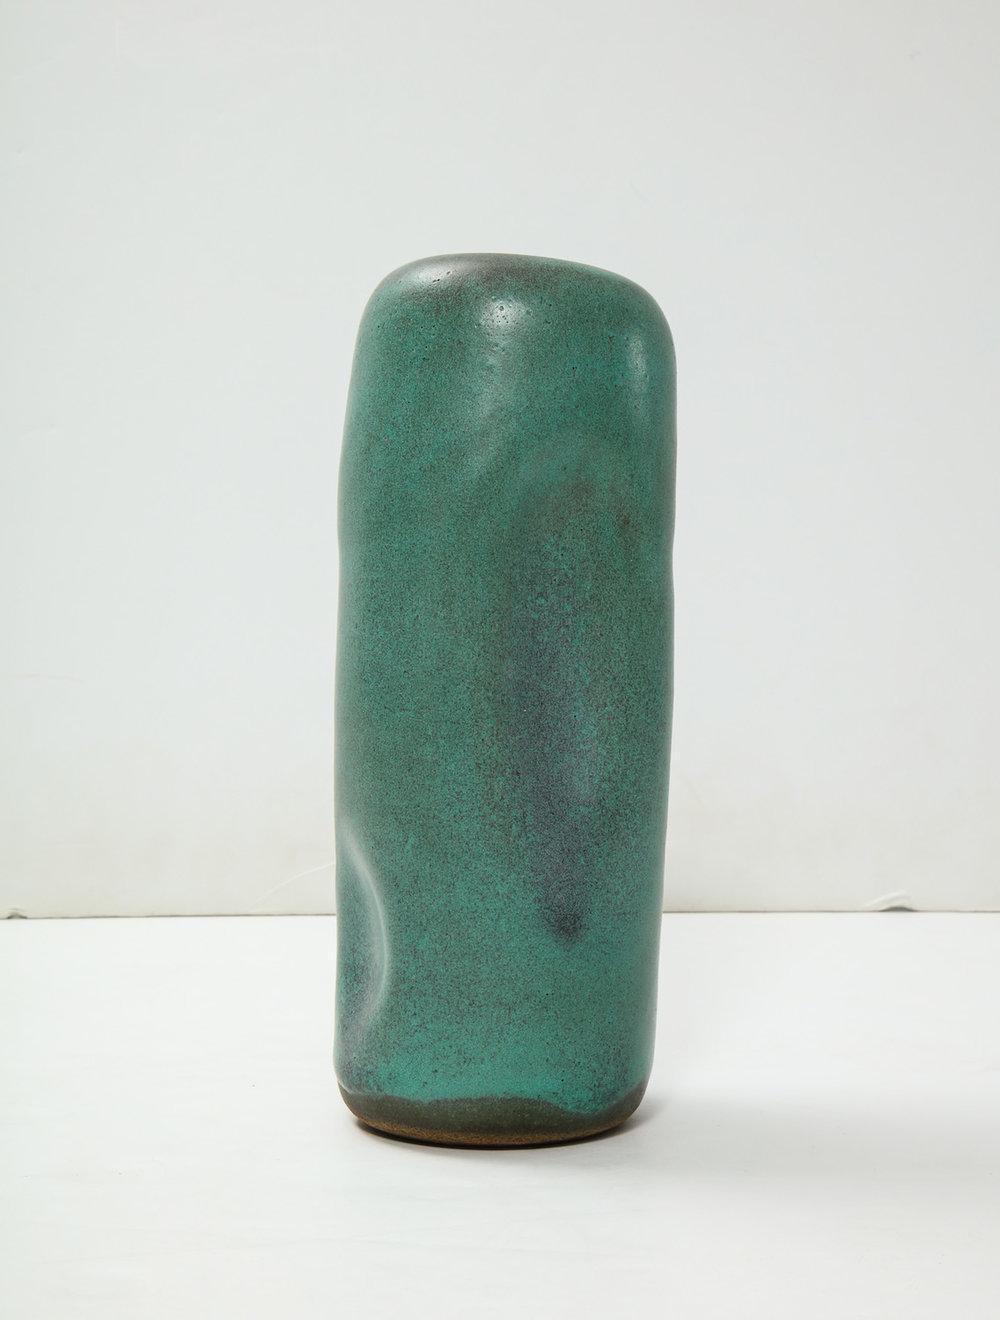 Cylindrical leaning TOTEM-form, hand built with indentations, green glazes. Artist-signed to underside.